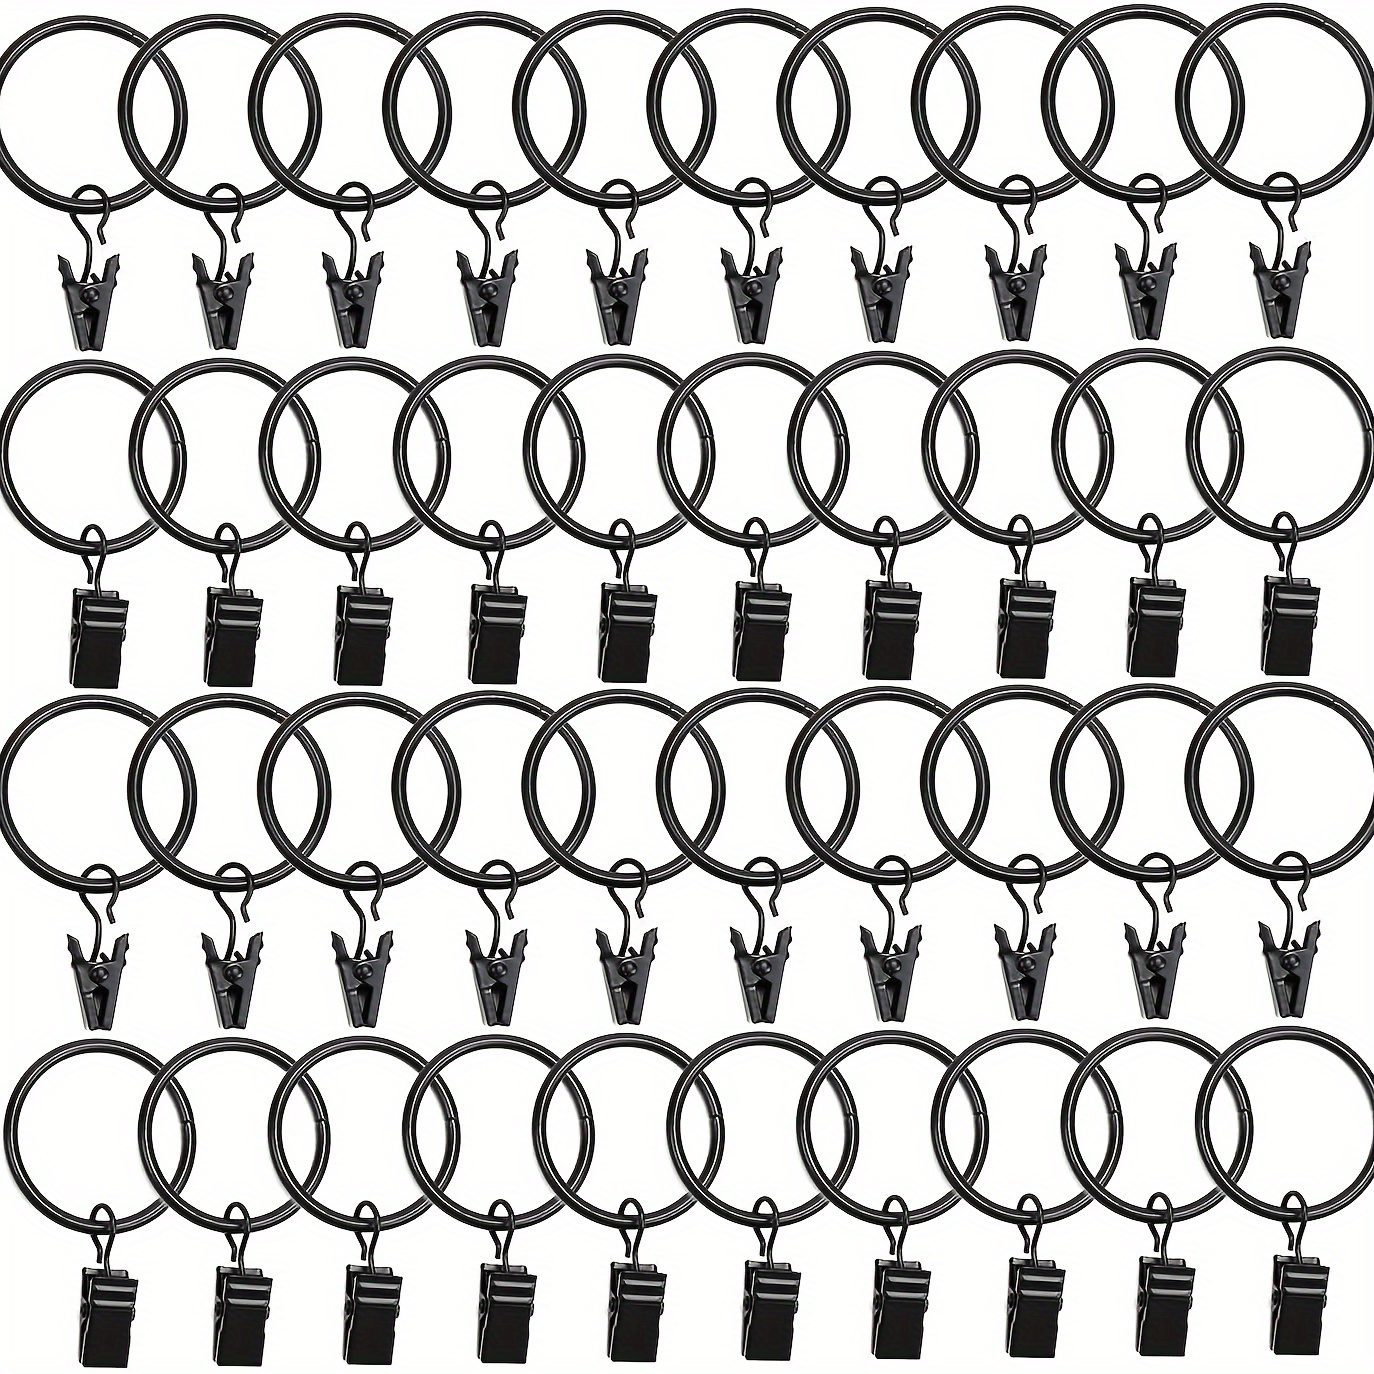 30 Pack Metal Openable Curtain Rings with Clips, Heavy Duty Decorative  Drapery Eyelet Curtain Rods Hangers Rings 